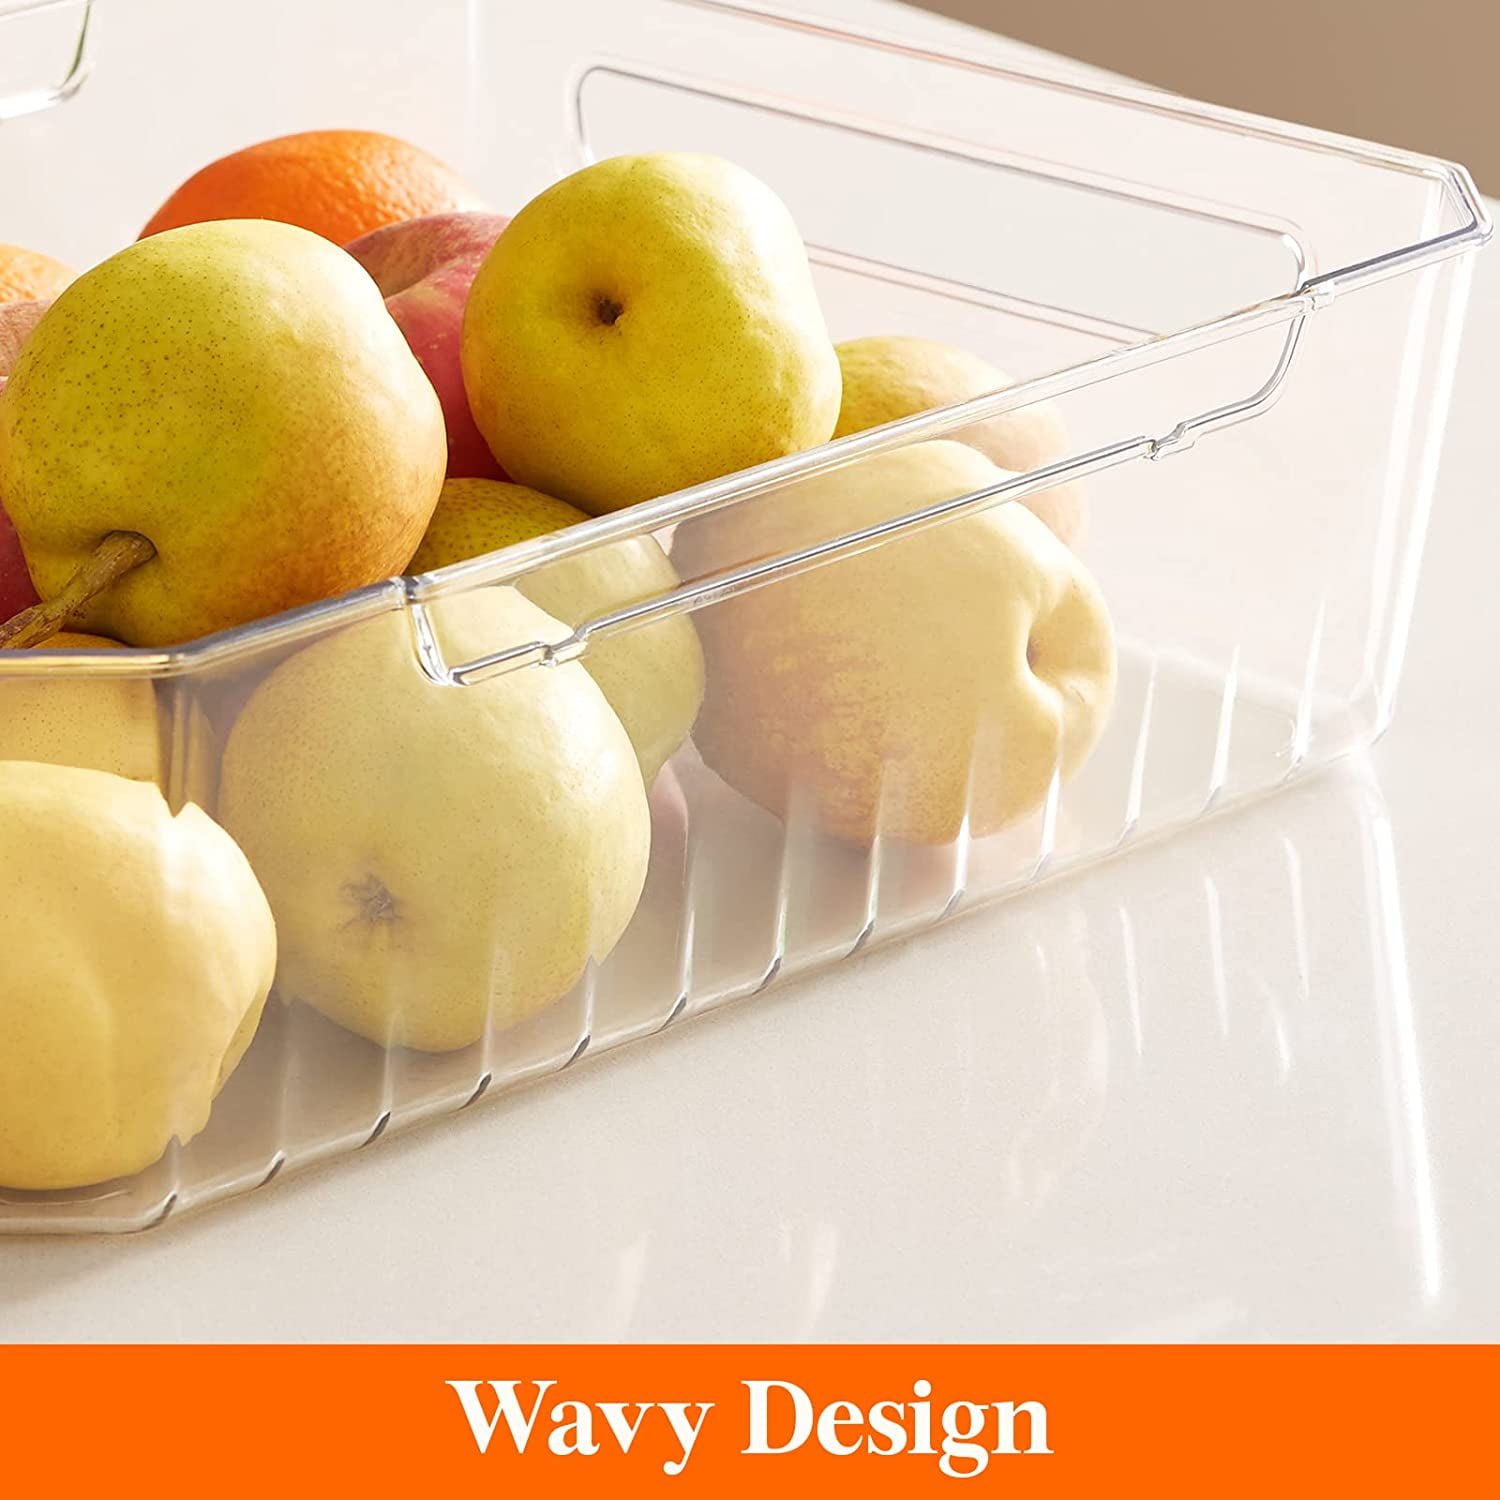 Can Organizer for Pantry, Refrigerator, Cabinet - Lifewit – Lifewitstore